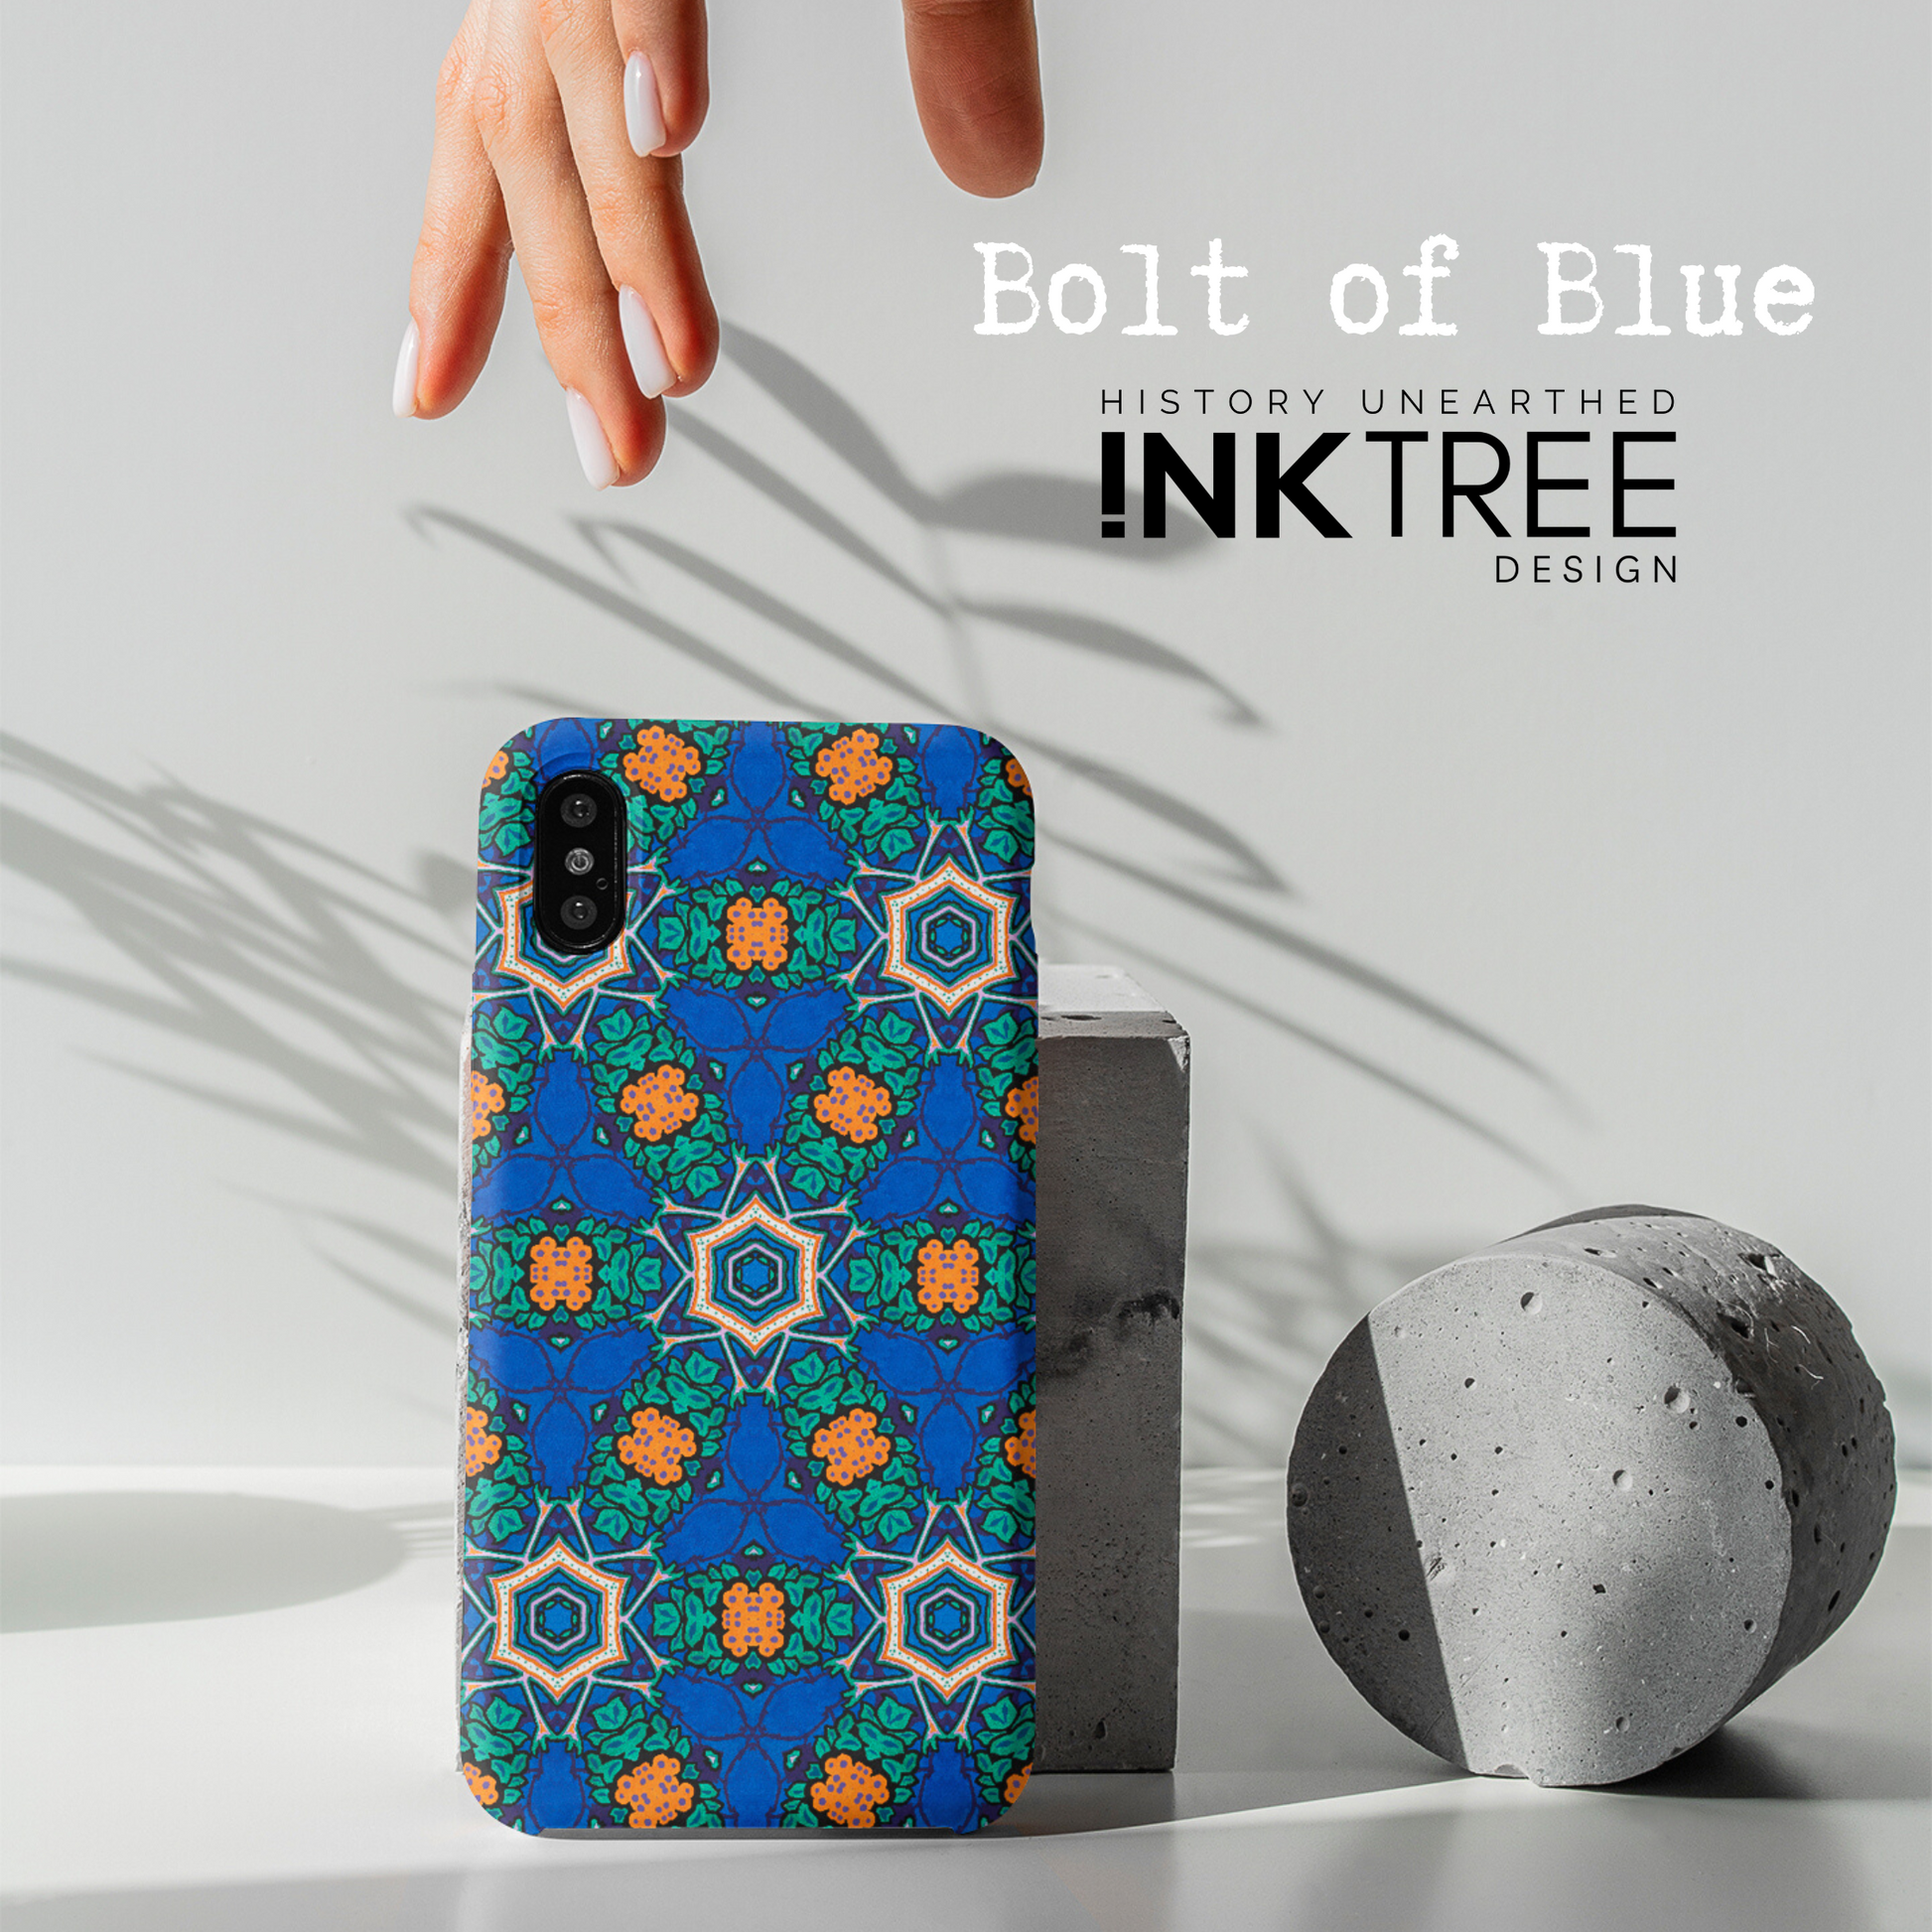 A female hand with white nail polish reaches down to a mobile phone with an orange, white, black, blue and green pattern the phone cover.  There is a shadow of a plant on a white wall background.  There is a grey concrete disk sitting on the table surface.